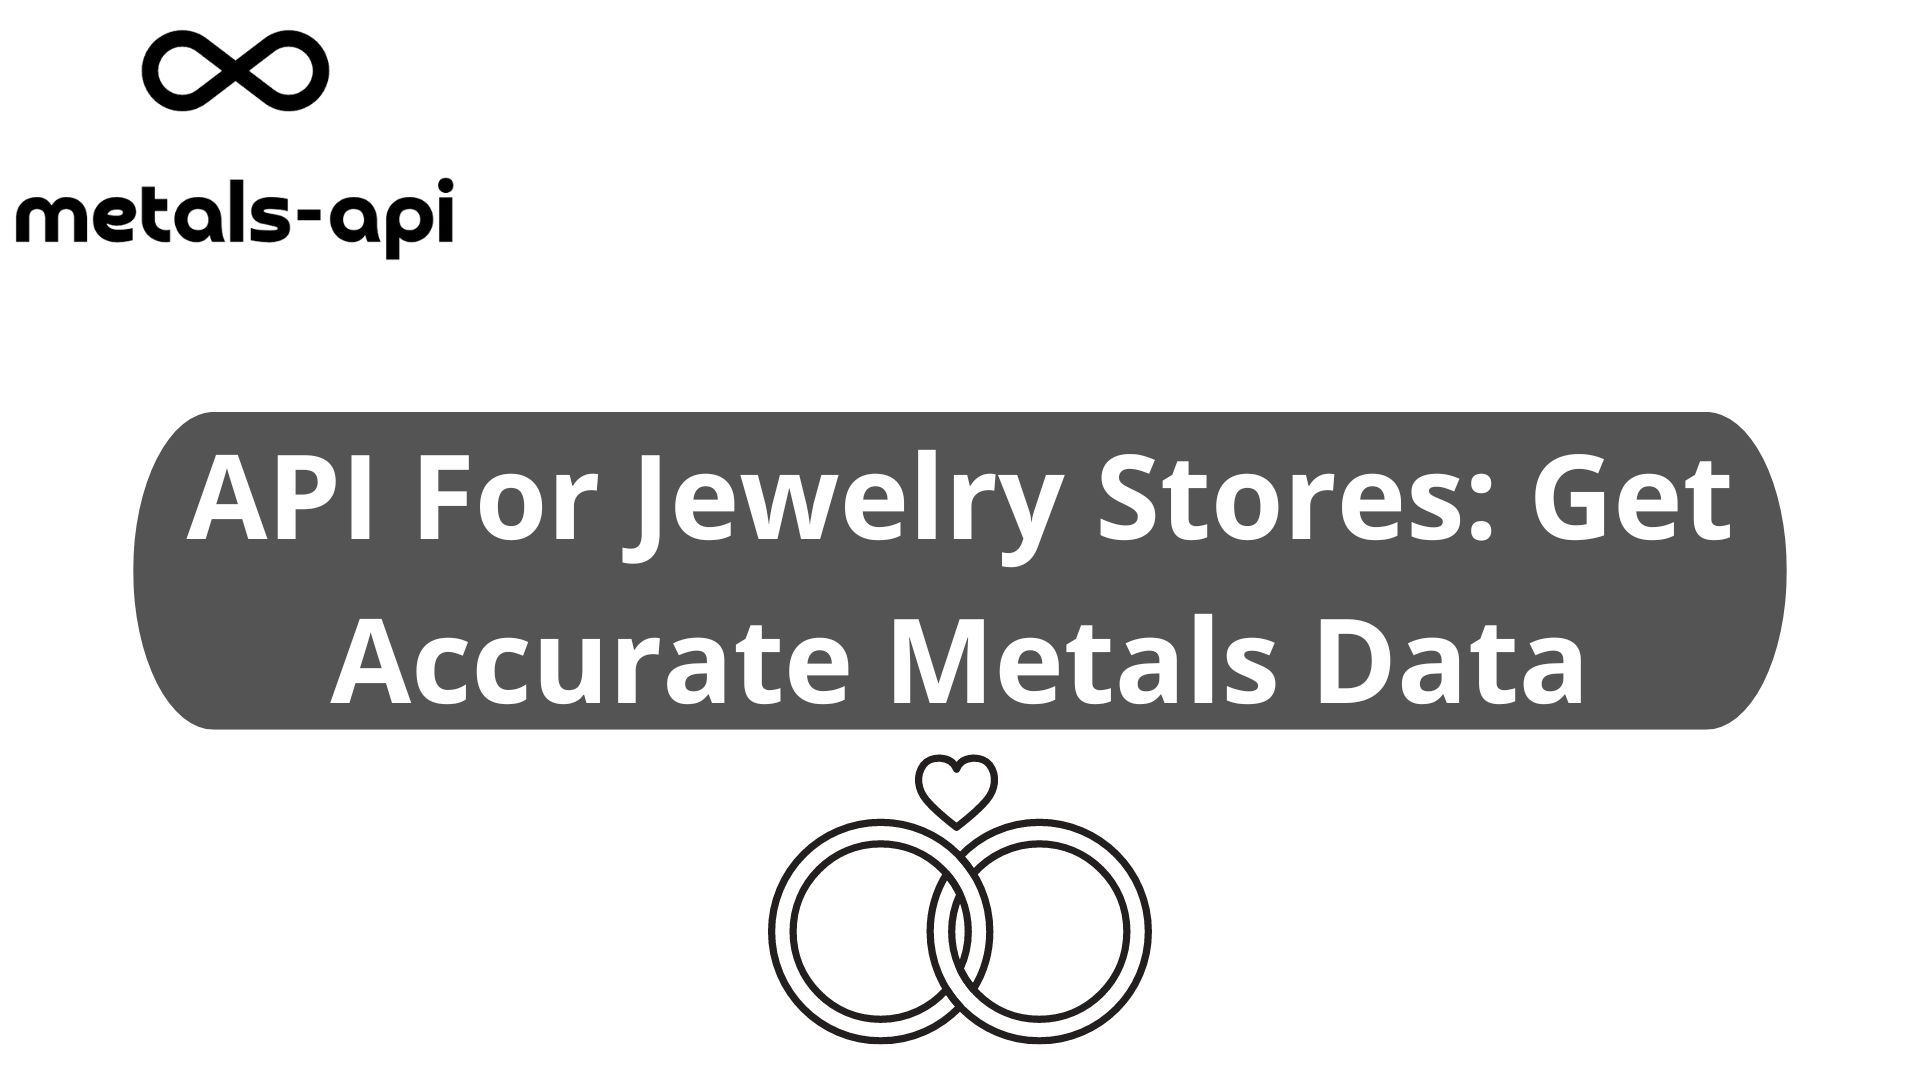 API For Jewelry Stores: Get Accurate Metals Data